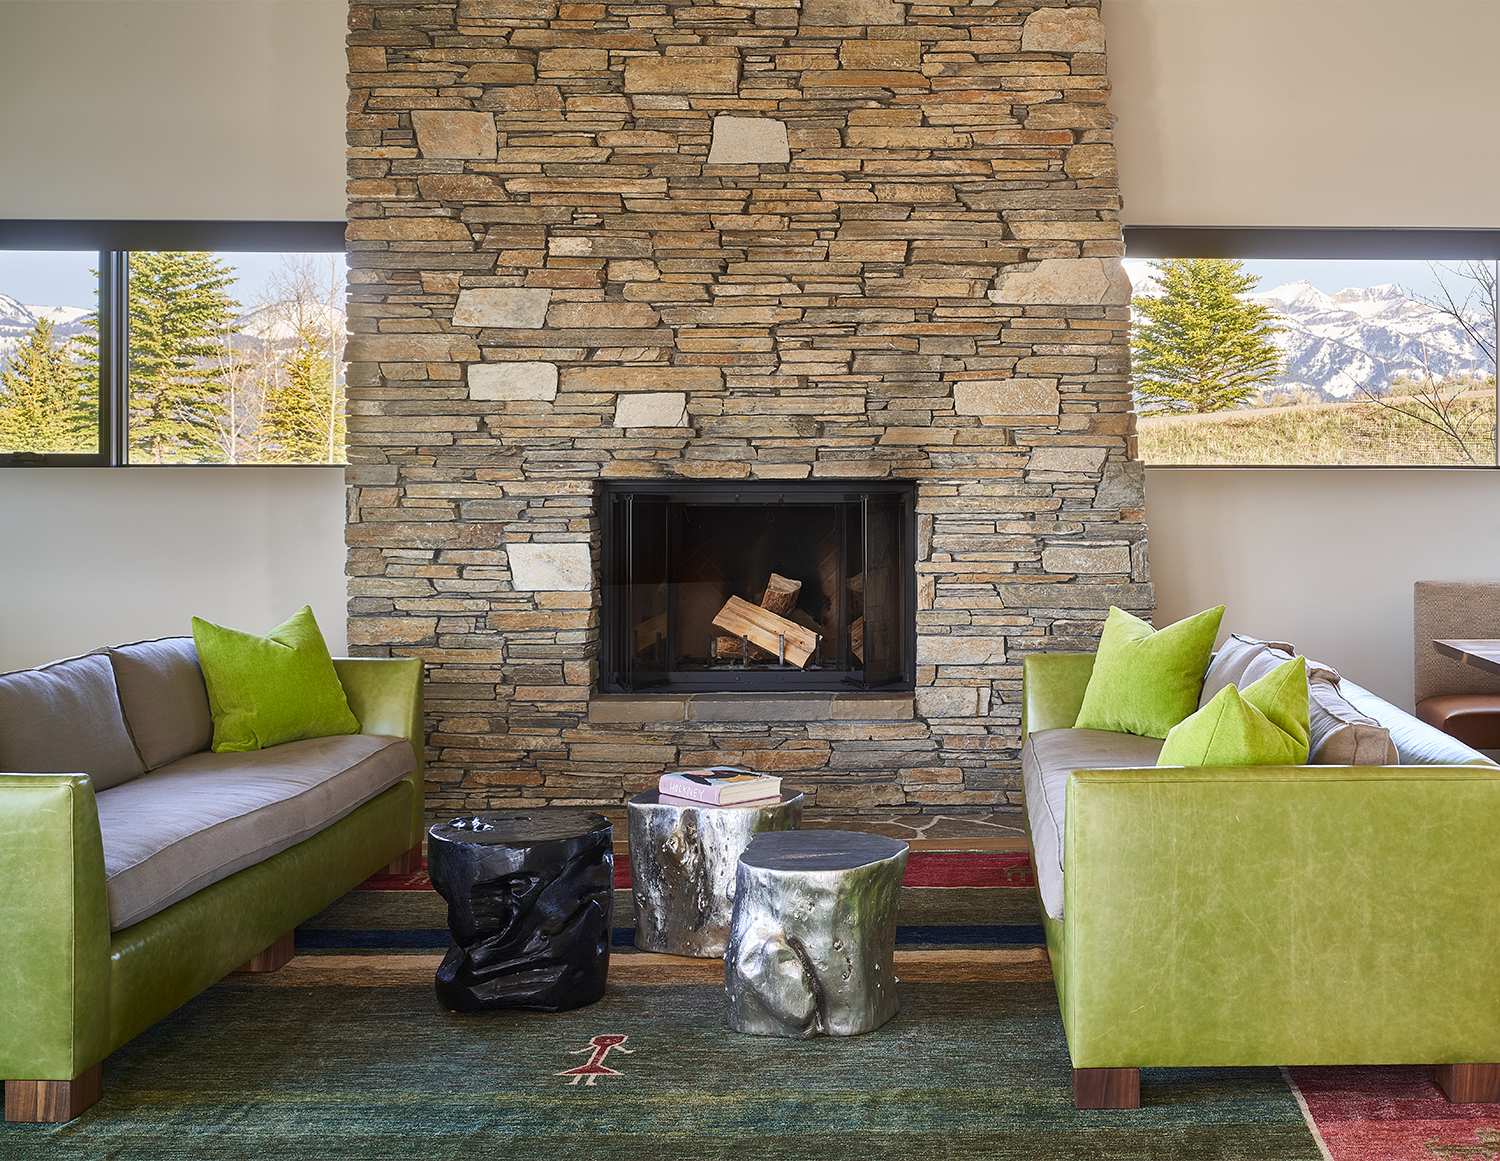 Interior view of the living room and fireplace at Gros Ventre West, a custom home designed and built by Farmer Payne Architects.